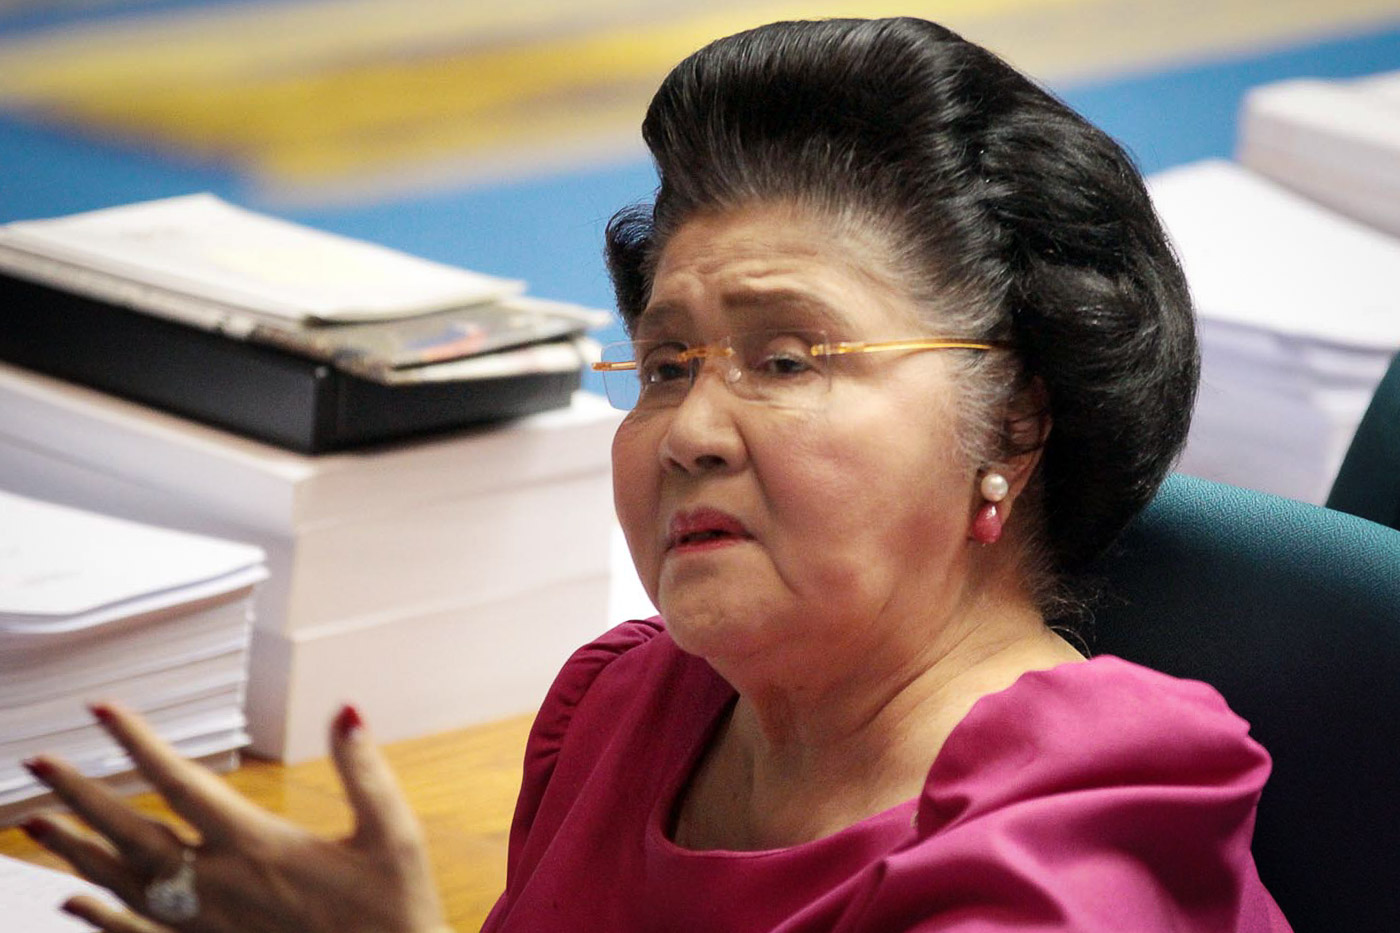 NO-SHOW. Ilocos Norte 2nd District  Representative Imelda Marcos usually attends House sessions, as seen in this file photo, but not from November 12 to 14, 2018. File photo by Darren Langit/Rappler  